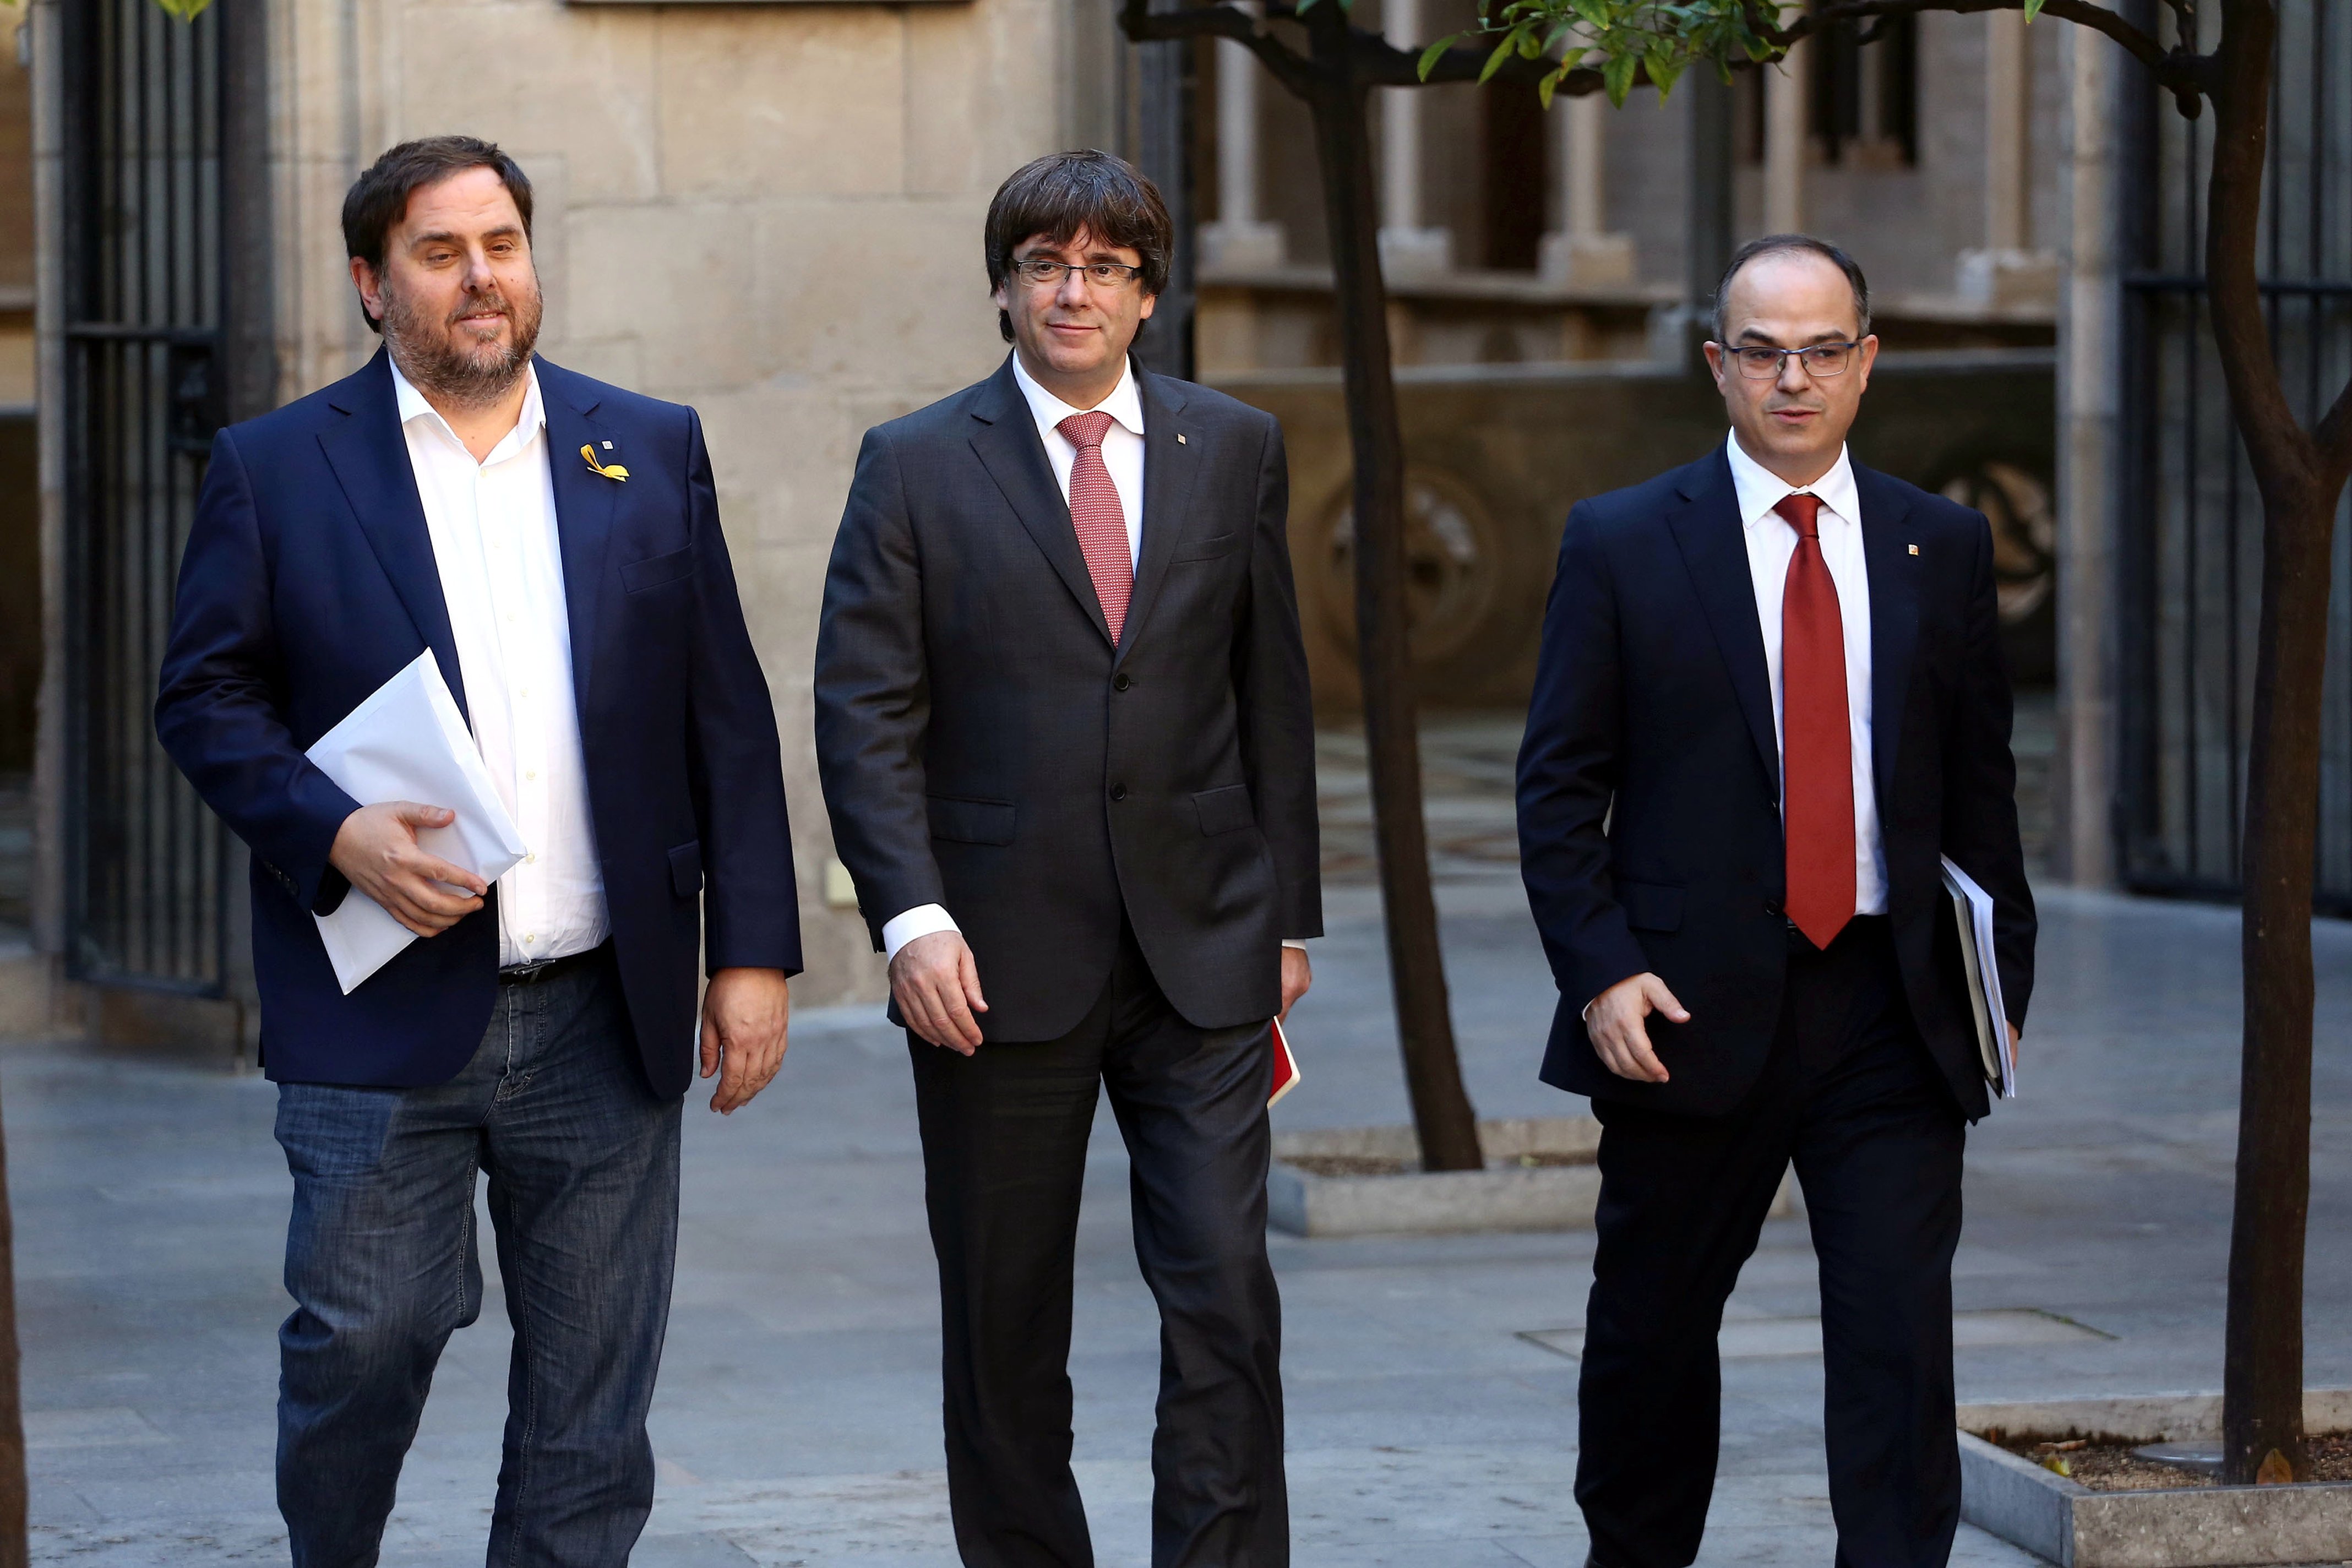 Surveys: PSOE to win EU elections in Spain, both Puigdemont and Junqueras to win seats